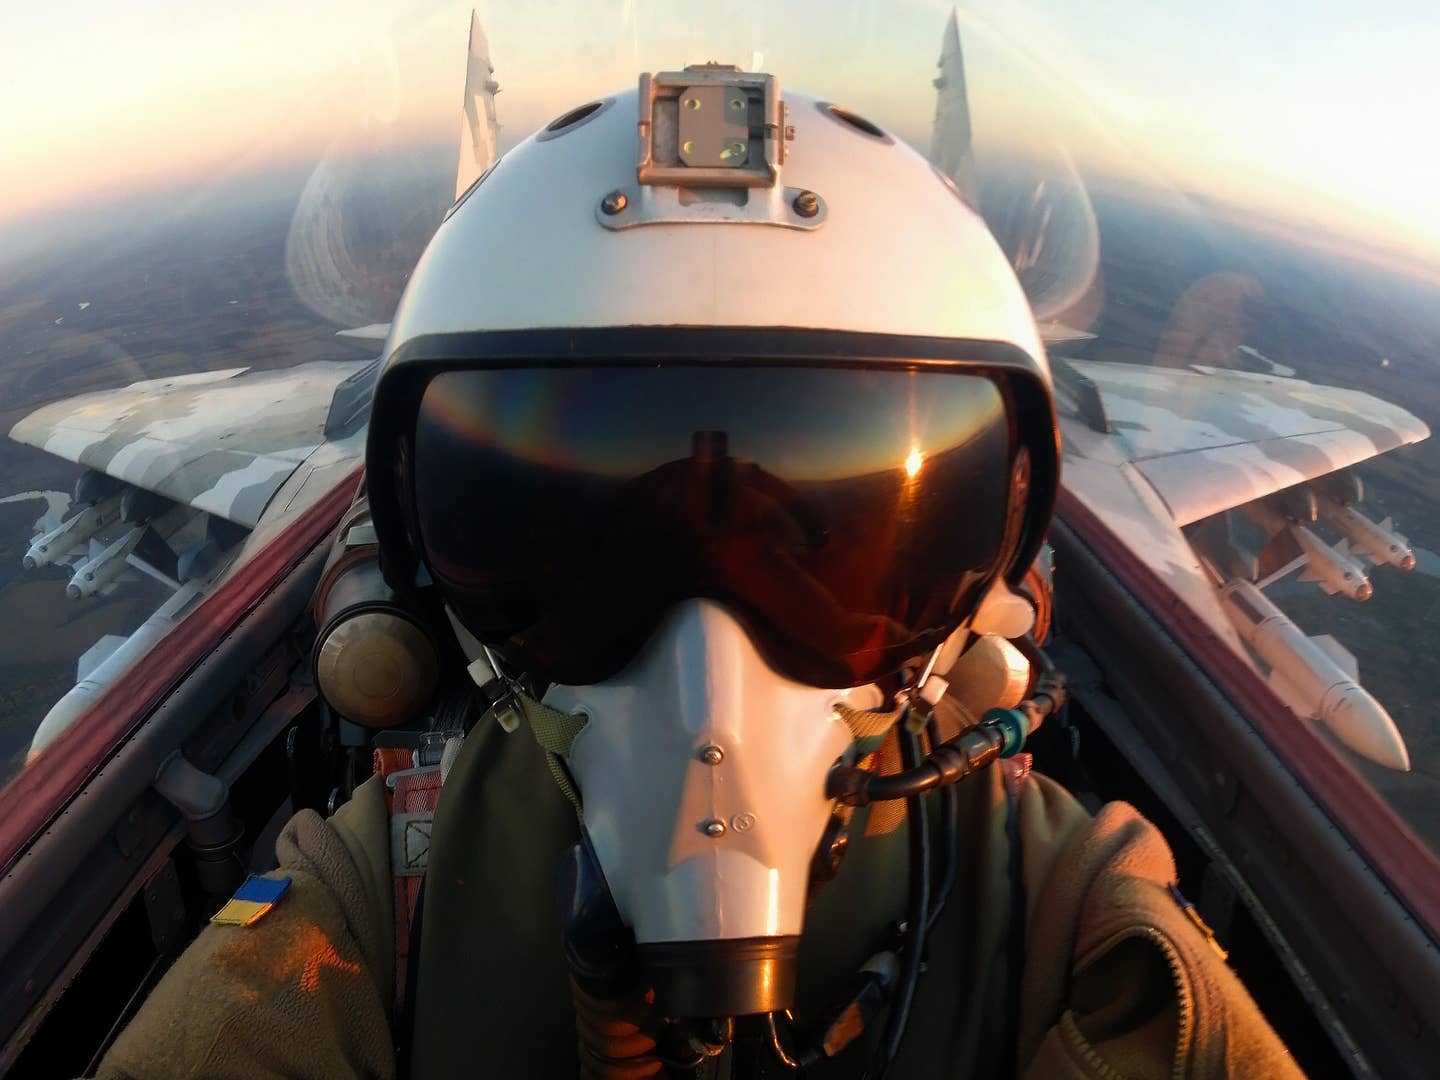 A selfie from the cockpit as Juice flies a MiG-29 fully armed with two R-27R and four R-73 air-to-air missiles. Juice/Ukrainian Air Force